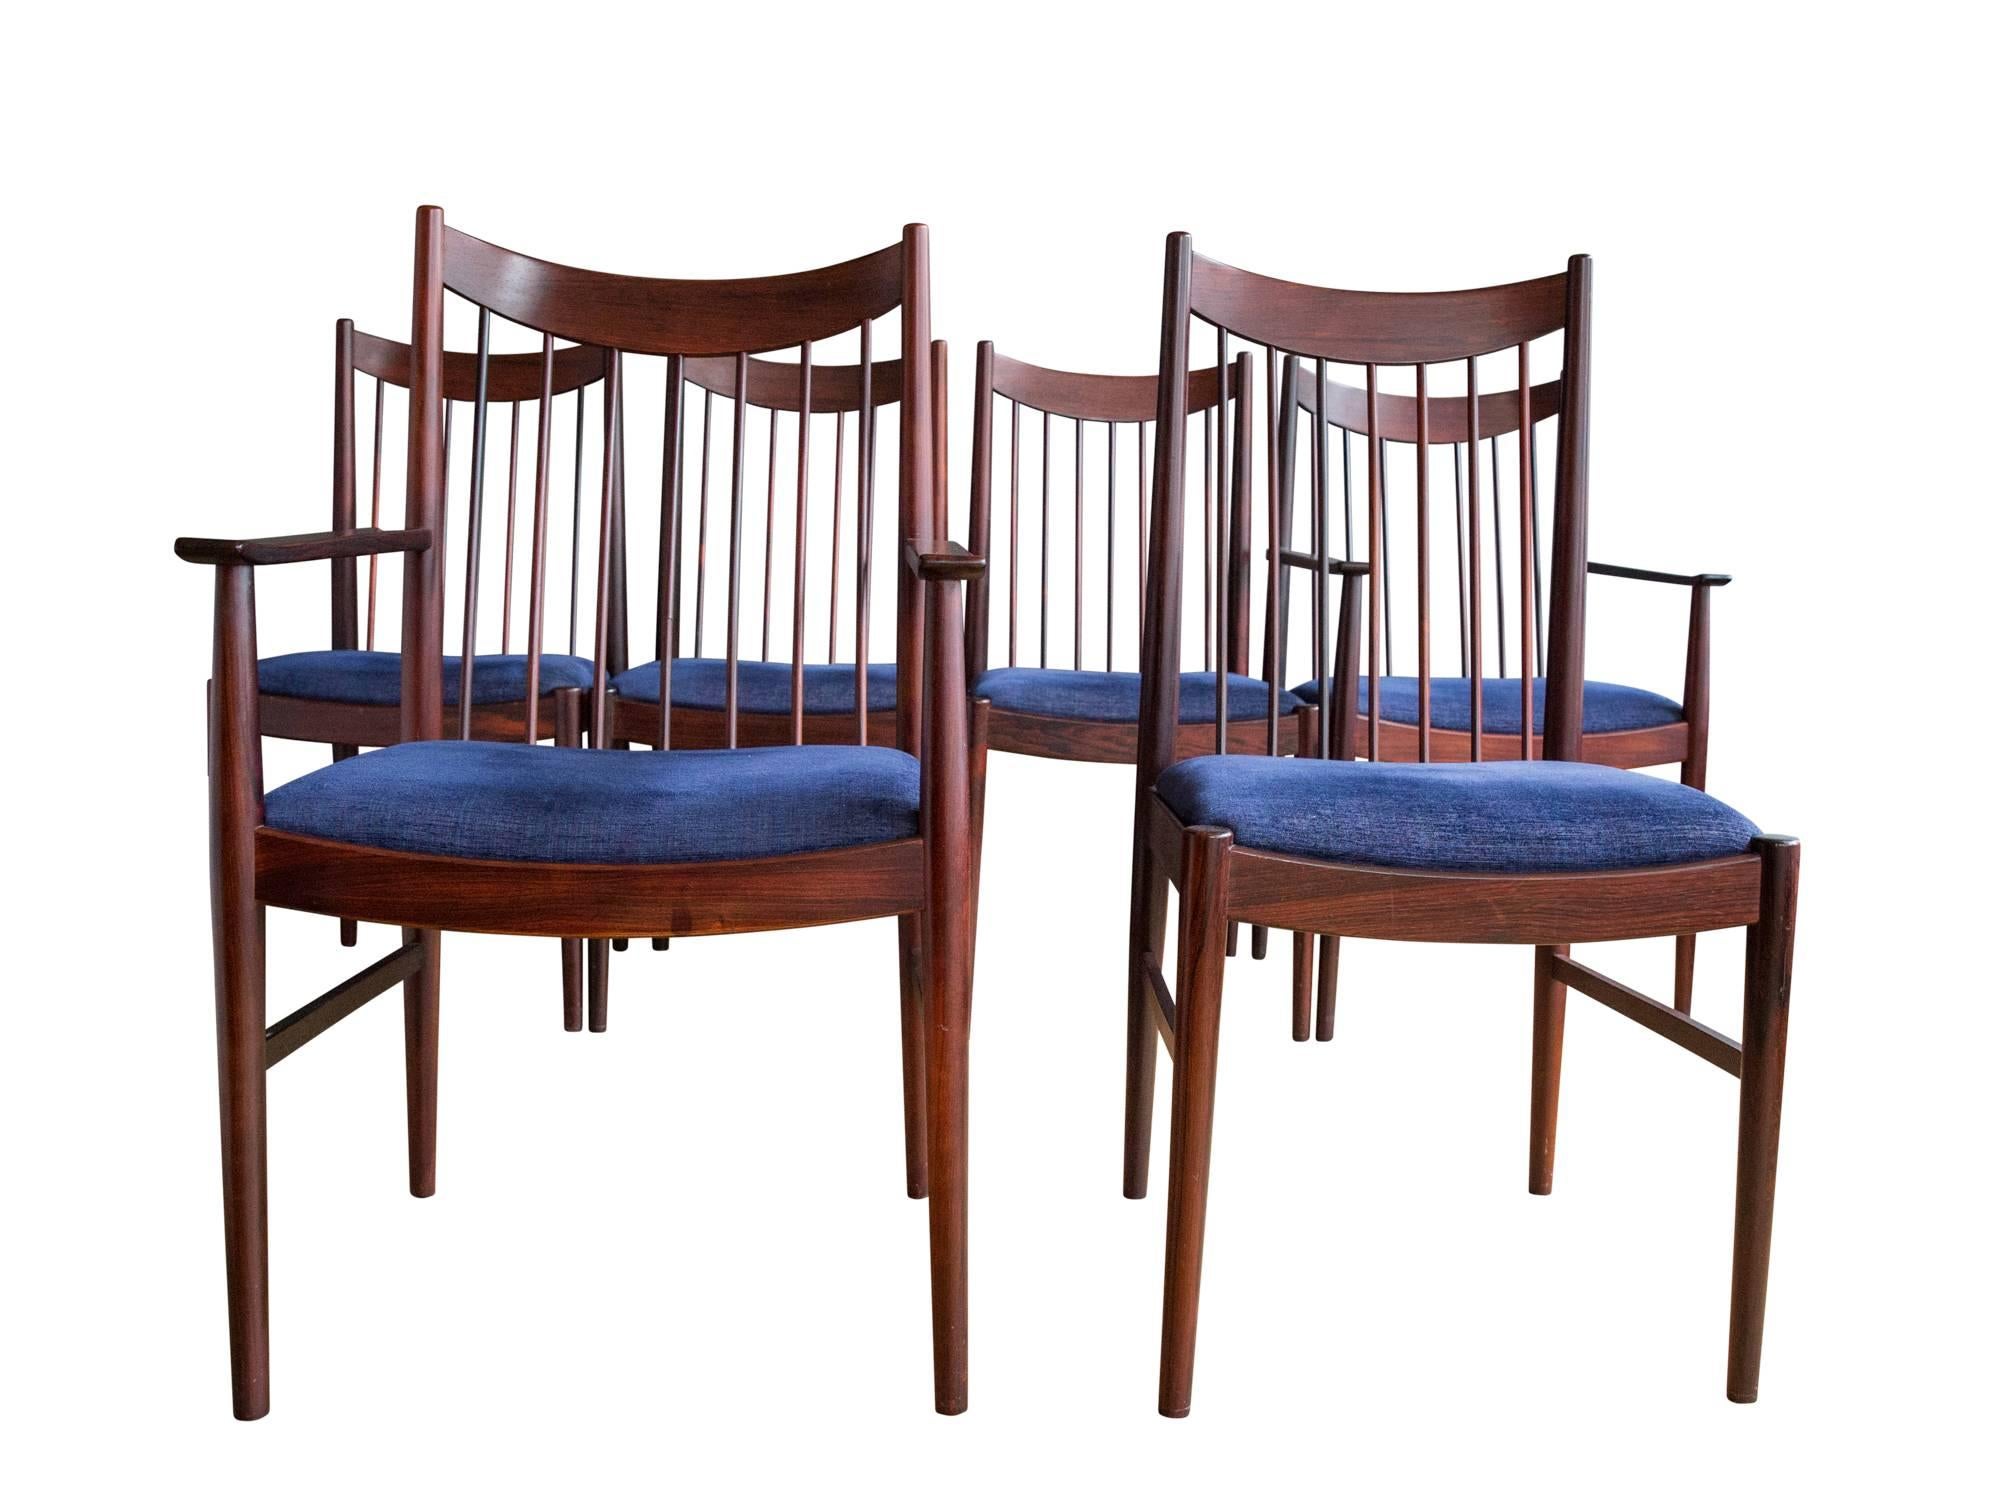 A set of six Model 422 high back dining chairs by Danish designer Arne Vodder for Sibast, circa 1960s. Featuring slender rosewood frames with slanted spindle backs and elegantly curved backrests. Set consists of two arm chairs and four side chairs.